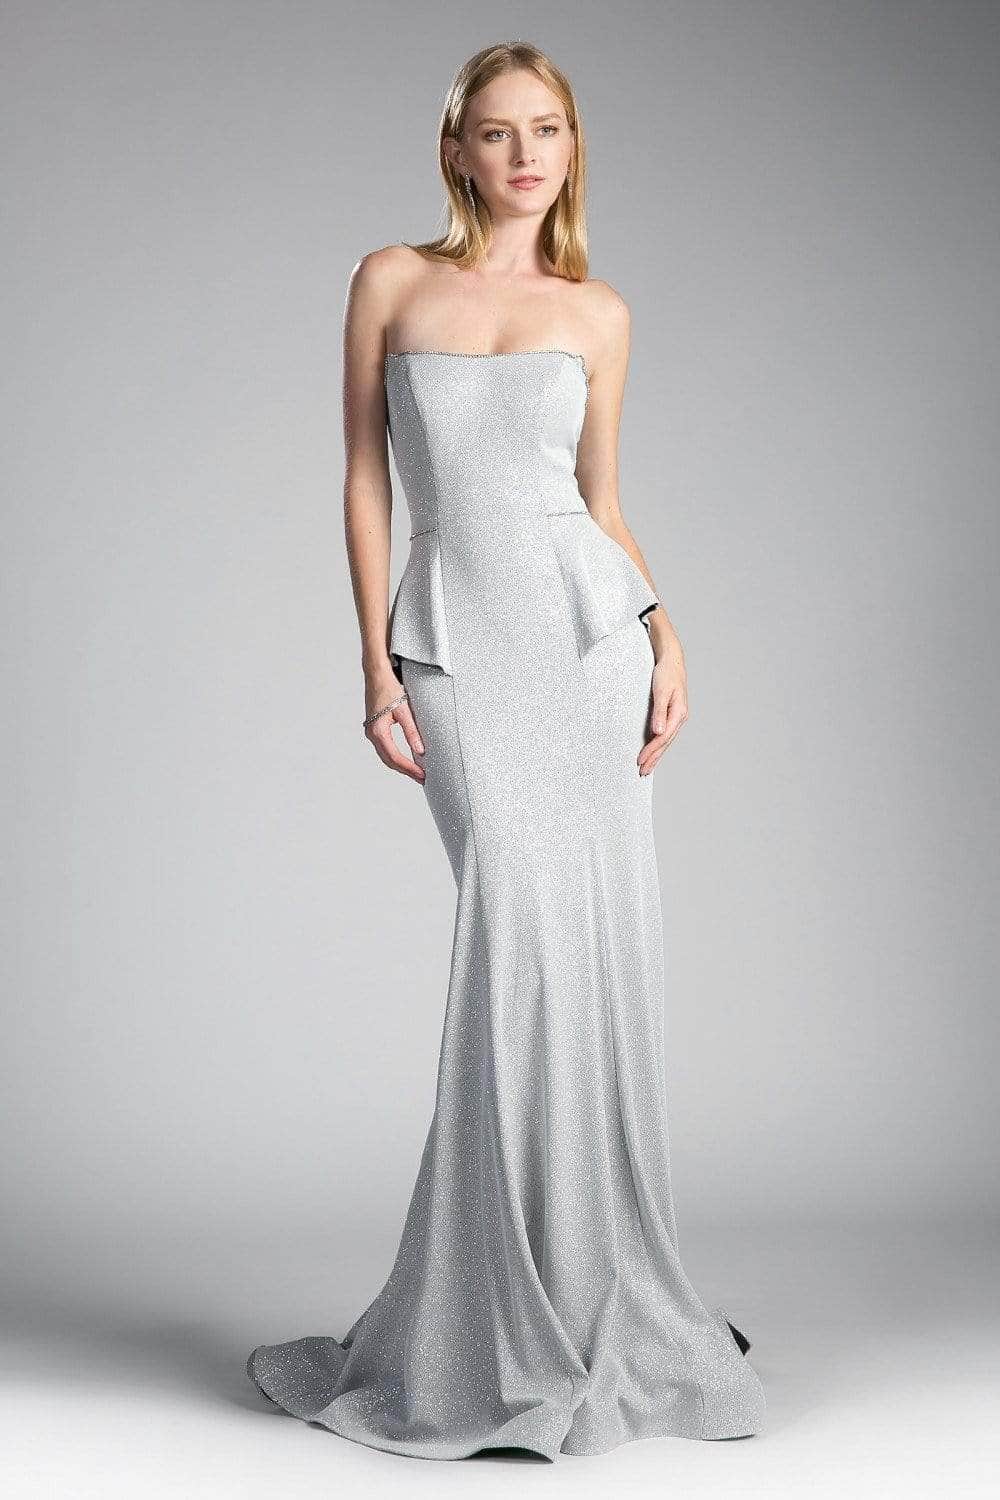 Ladivine 5025 Special Occasion Dress 2 / Silver